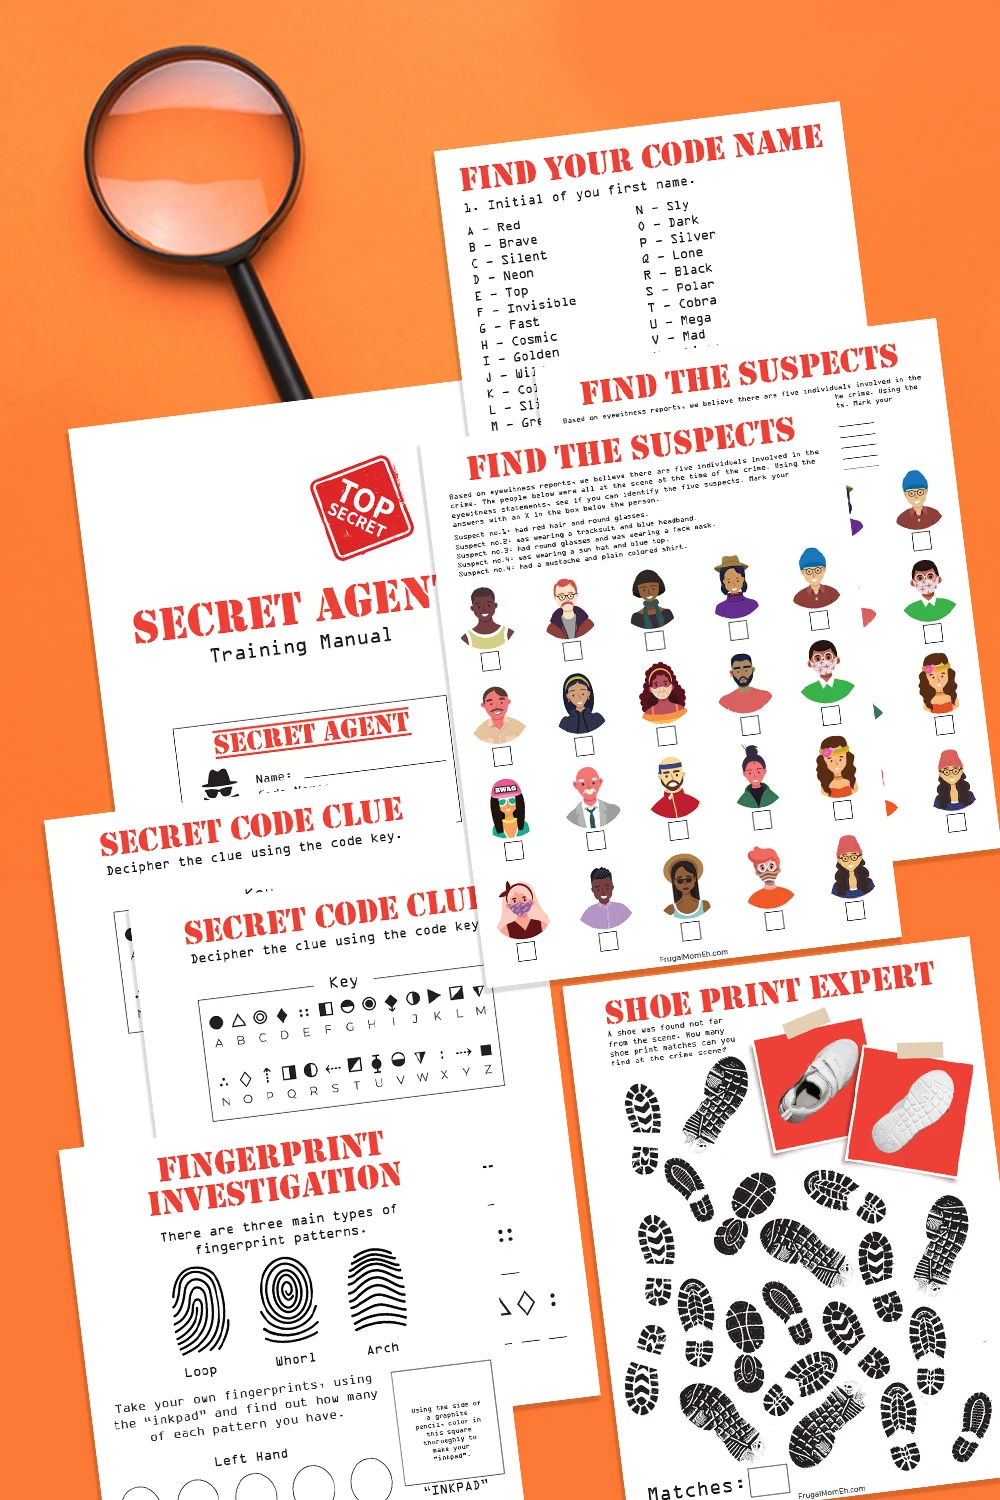 Download our free printable secret agent training manual and learn how to become a master sleuth. Includes 8 printable sheets full of fun!